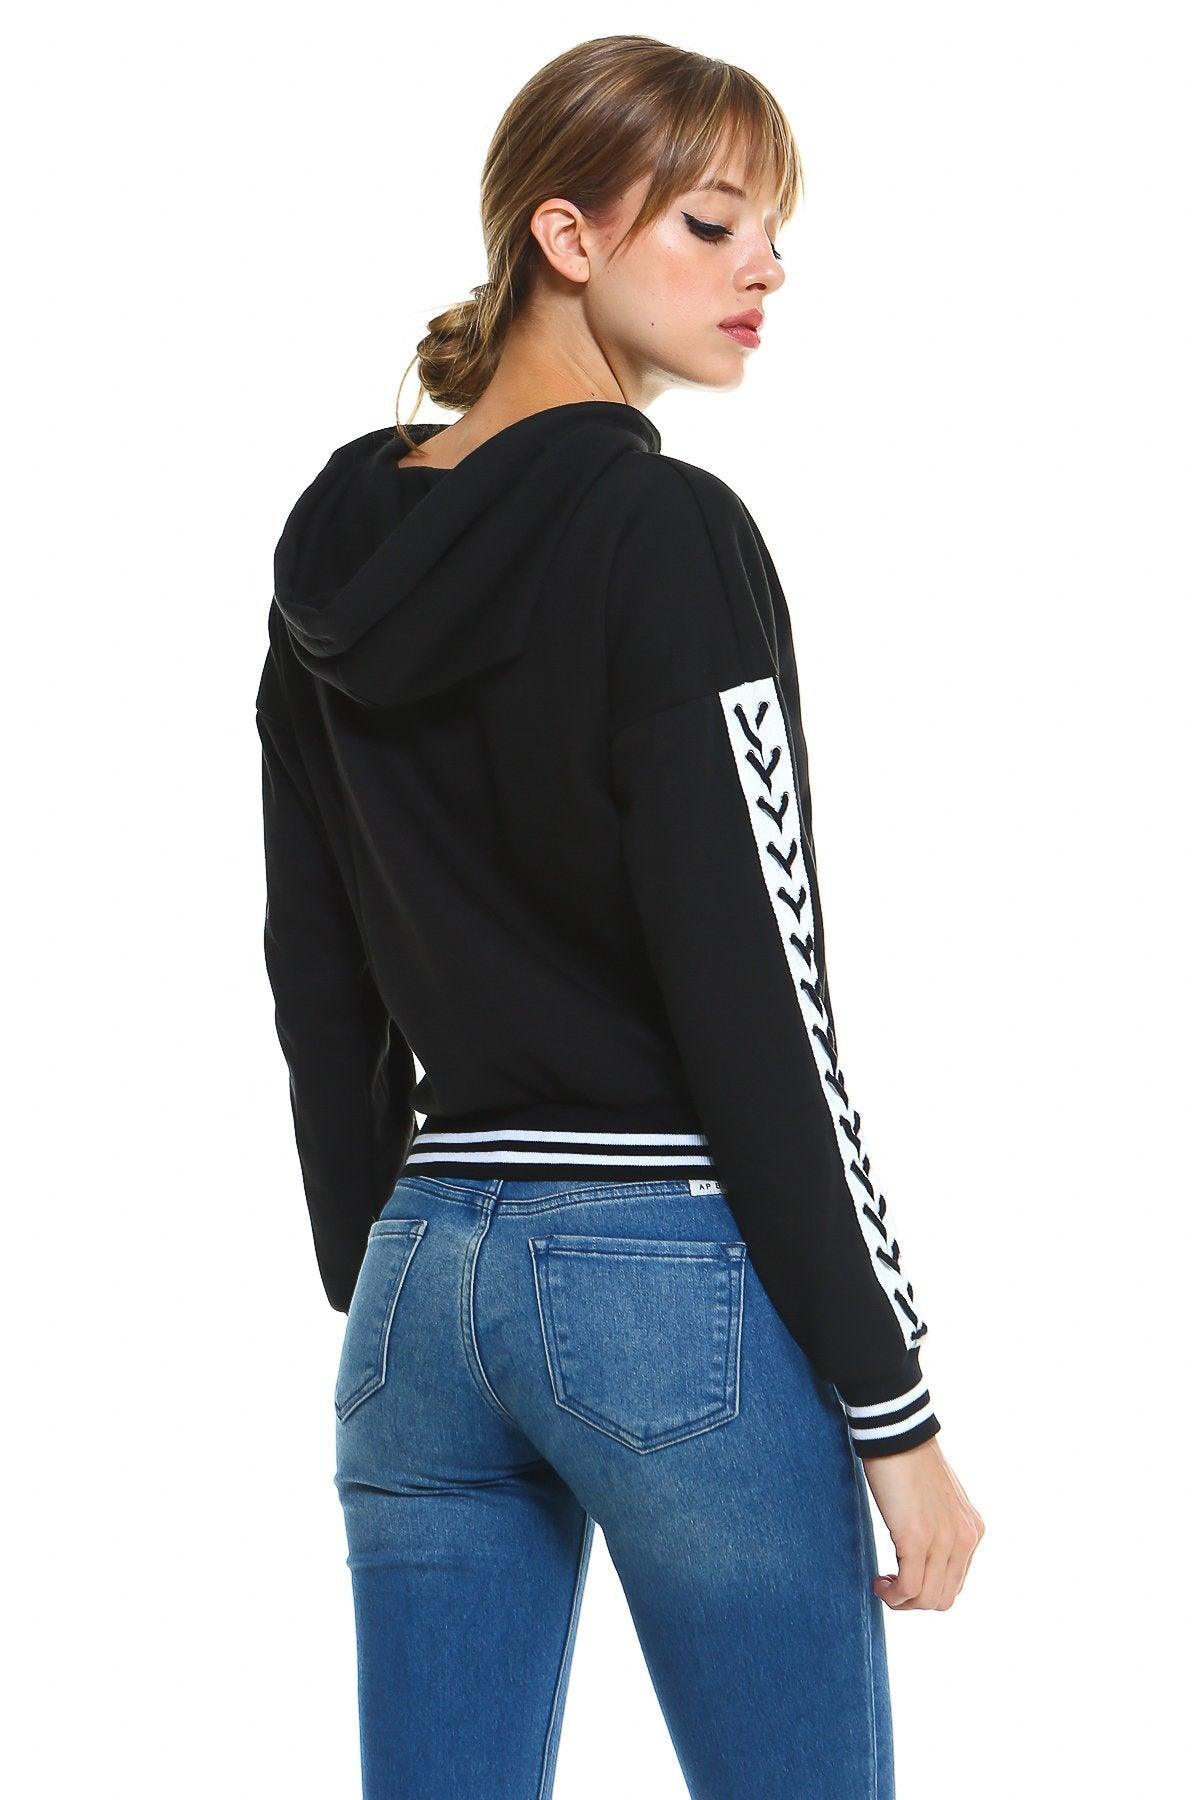 Fleece Lace Up Detail Sleeve Hooded Top - Lacatang Market